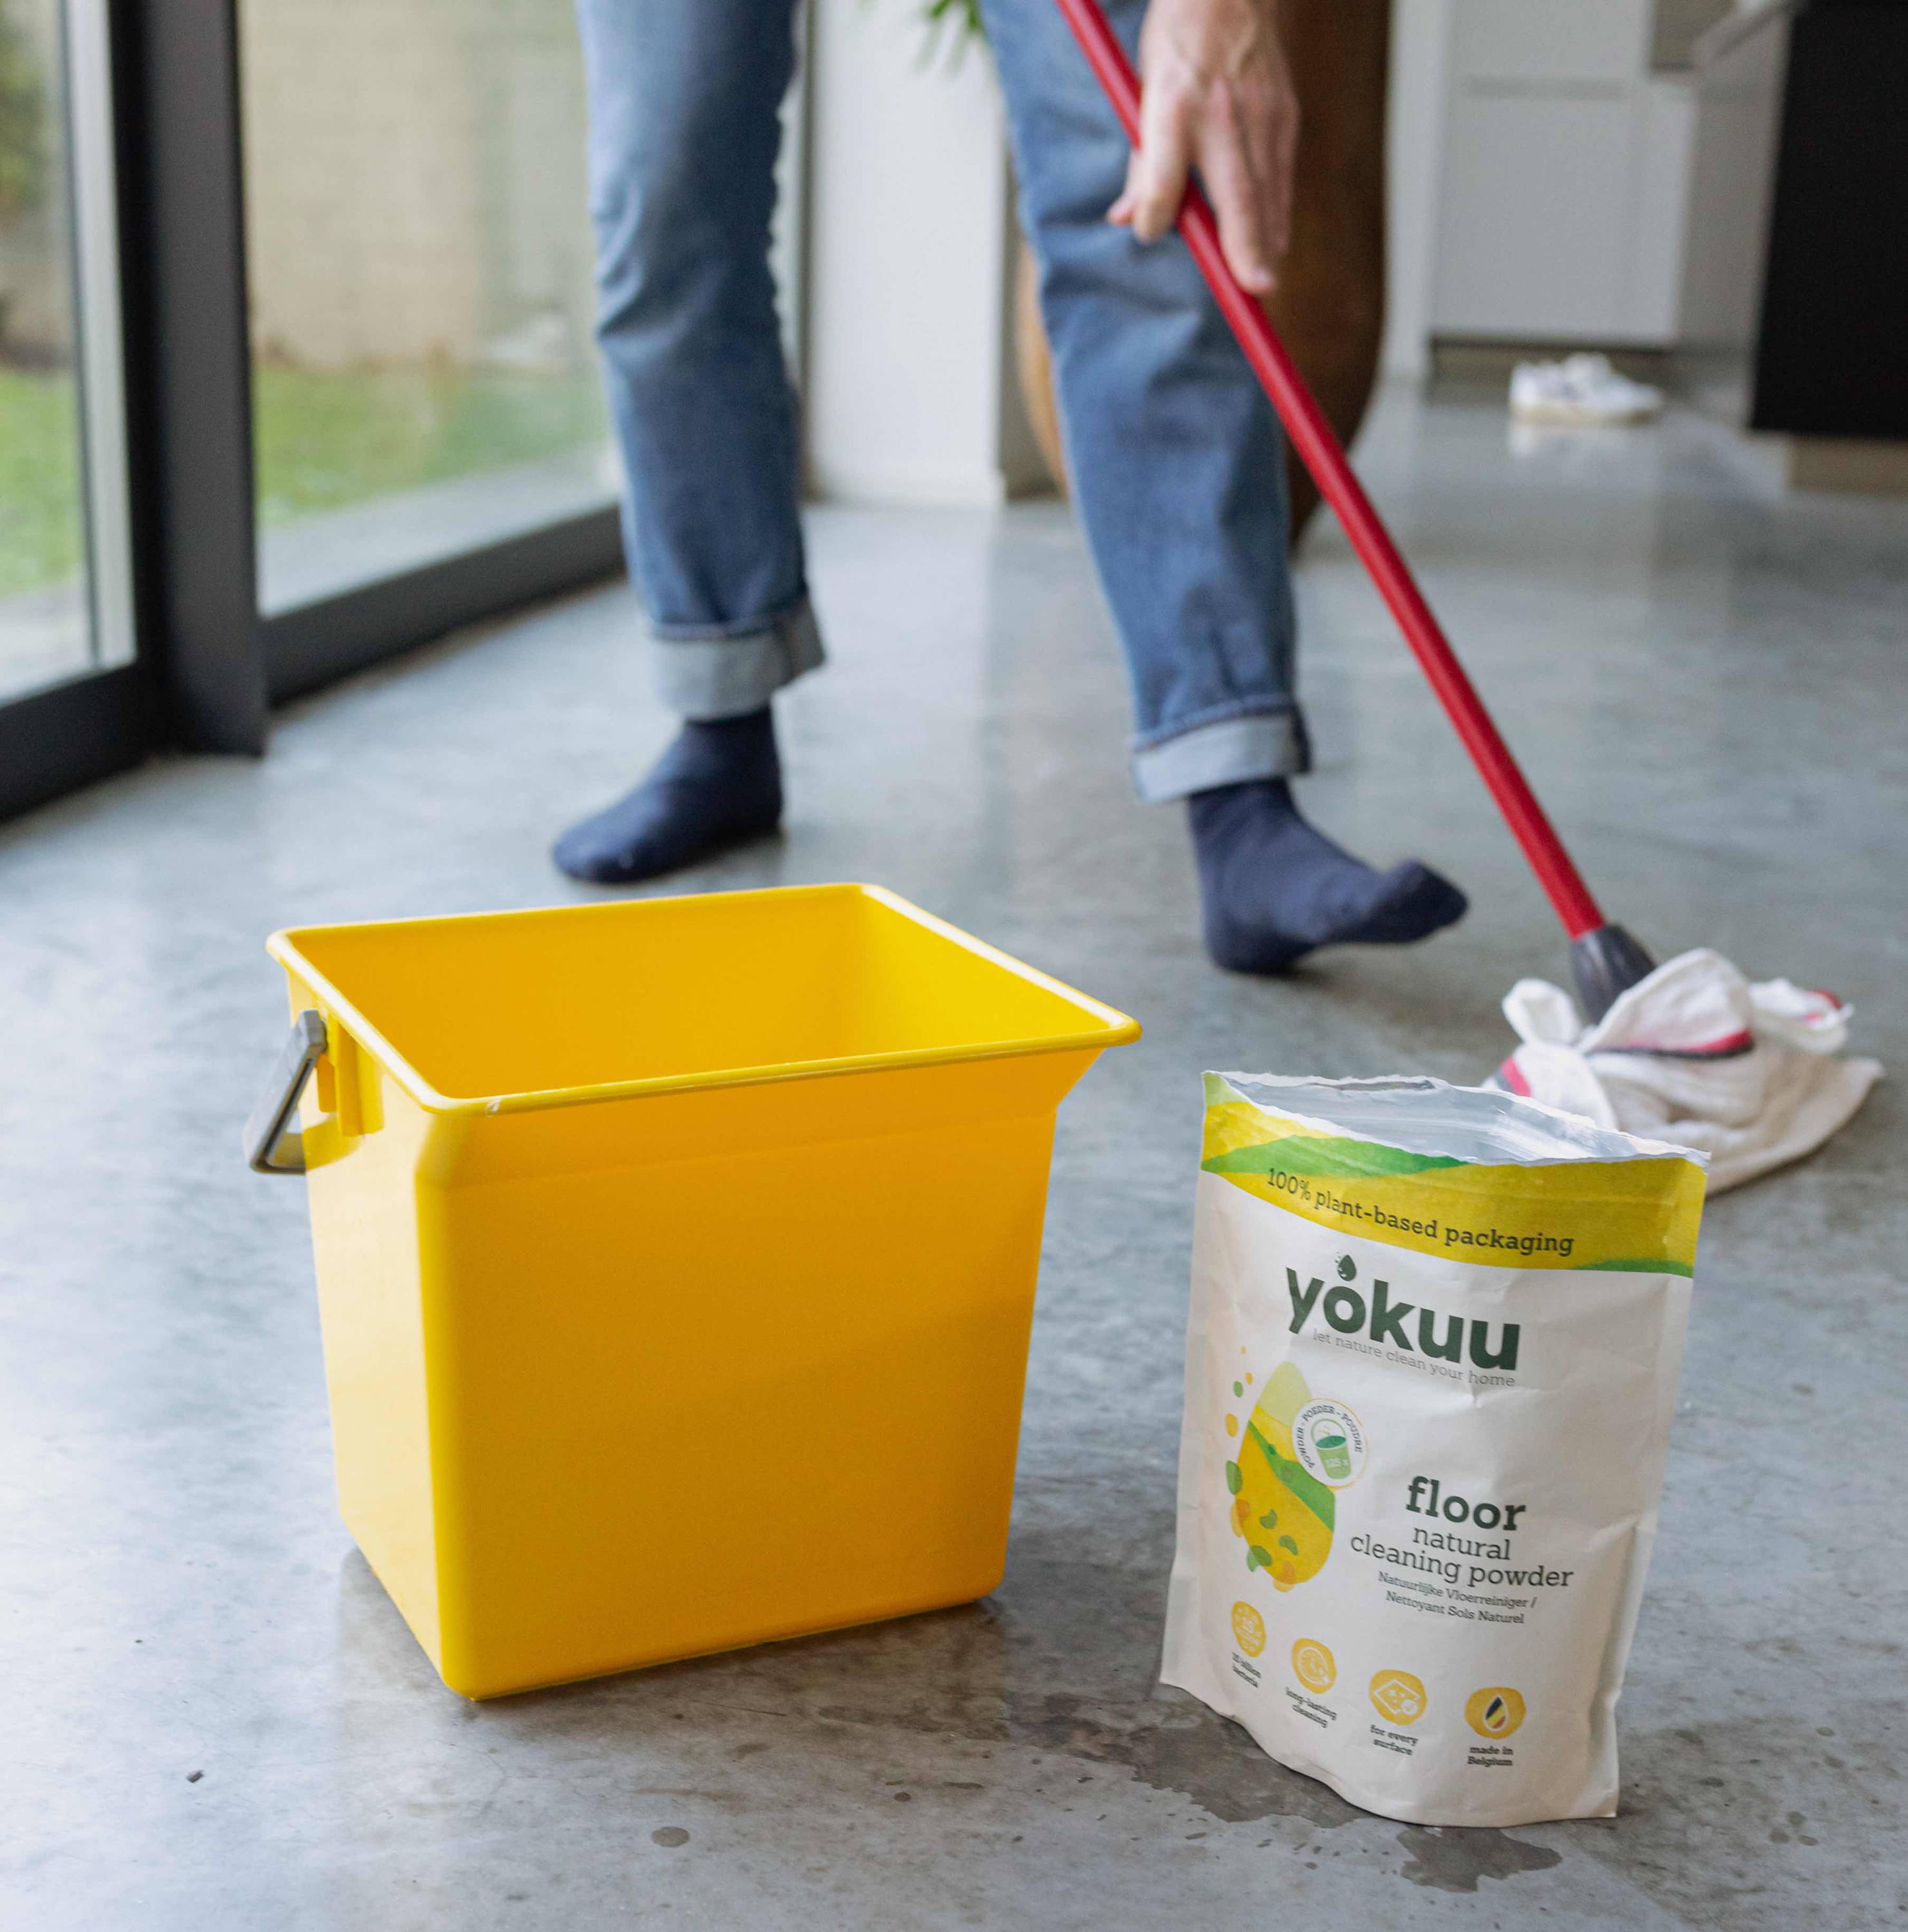 A yellow plastic bucket and an open bag of YOKUU floor cleaner are visible on a concrete floor. In the background, a pair of legs belonging to a man are visible, mopping the floor with a wet mop. The room appears to be well-lit with overhead lighting.